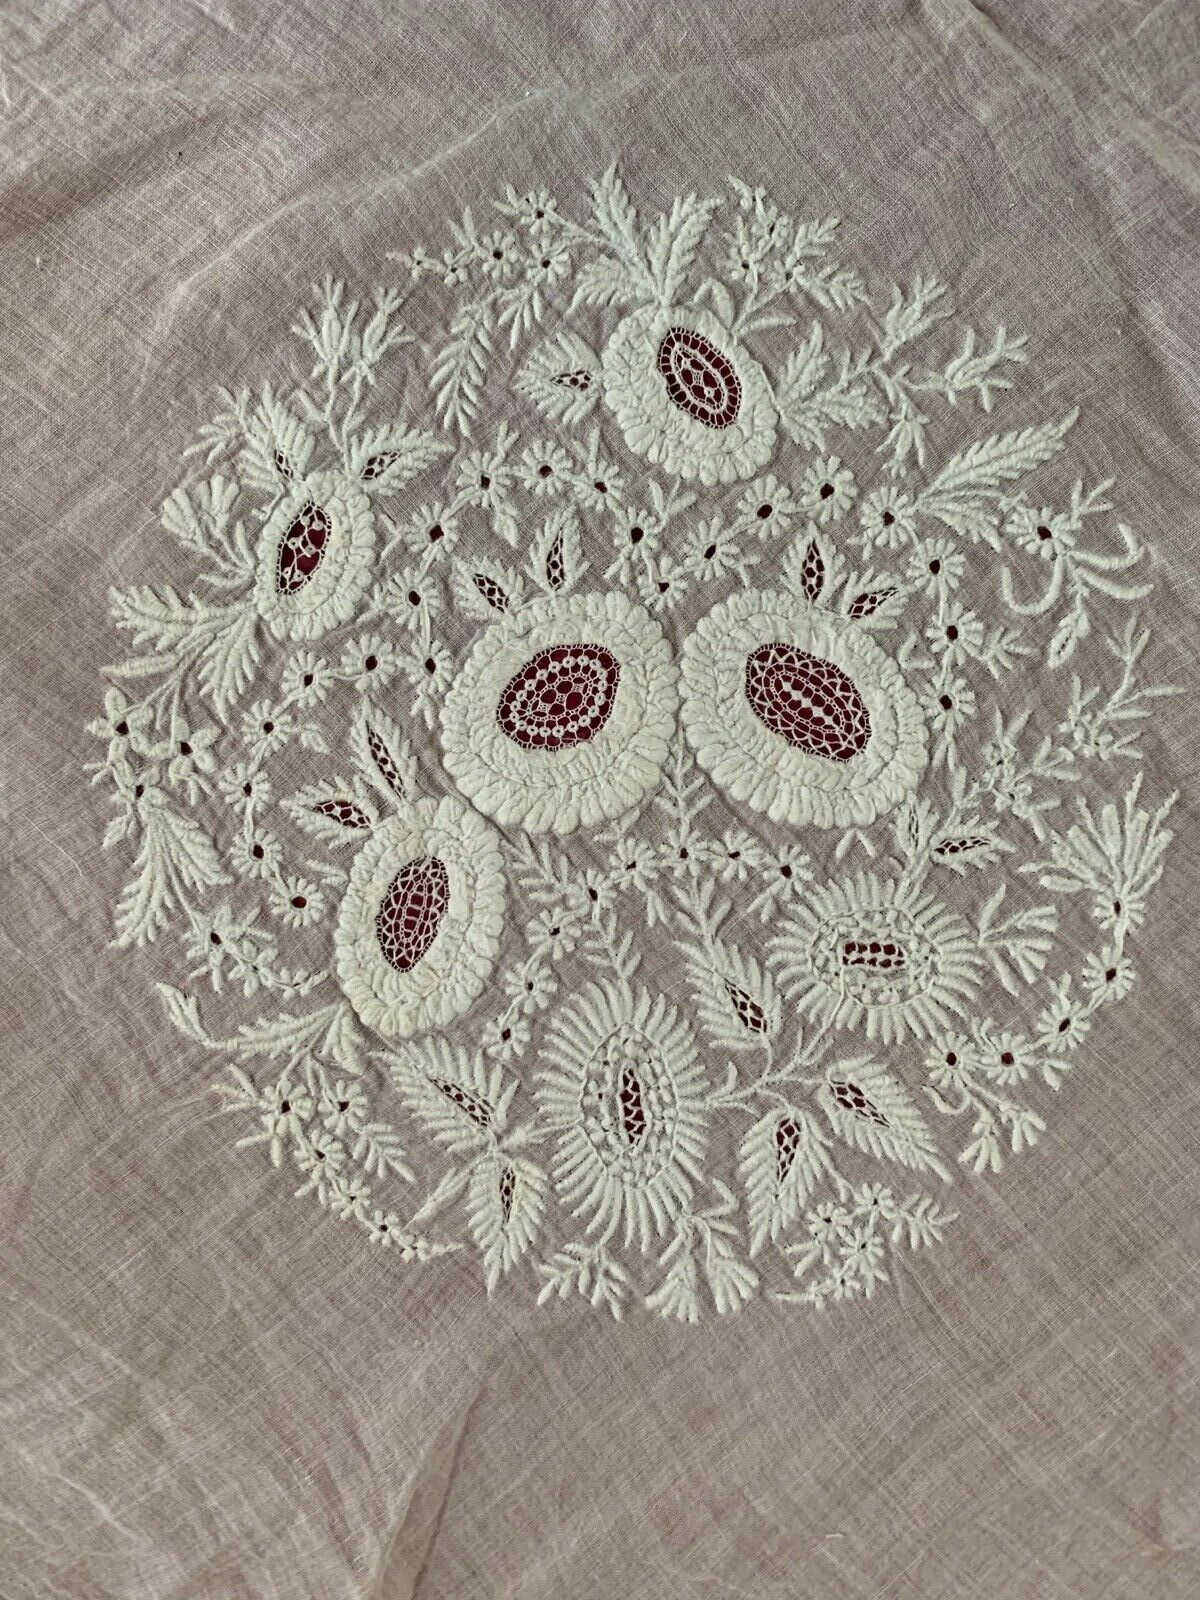 Gorgeous French Antique Hand Embroidered FOND DE BONNET on Muslin (1850s-1860\'s)